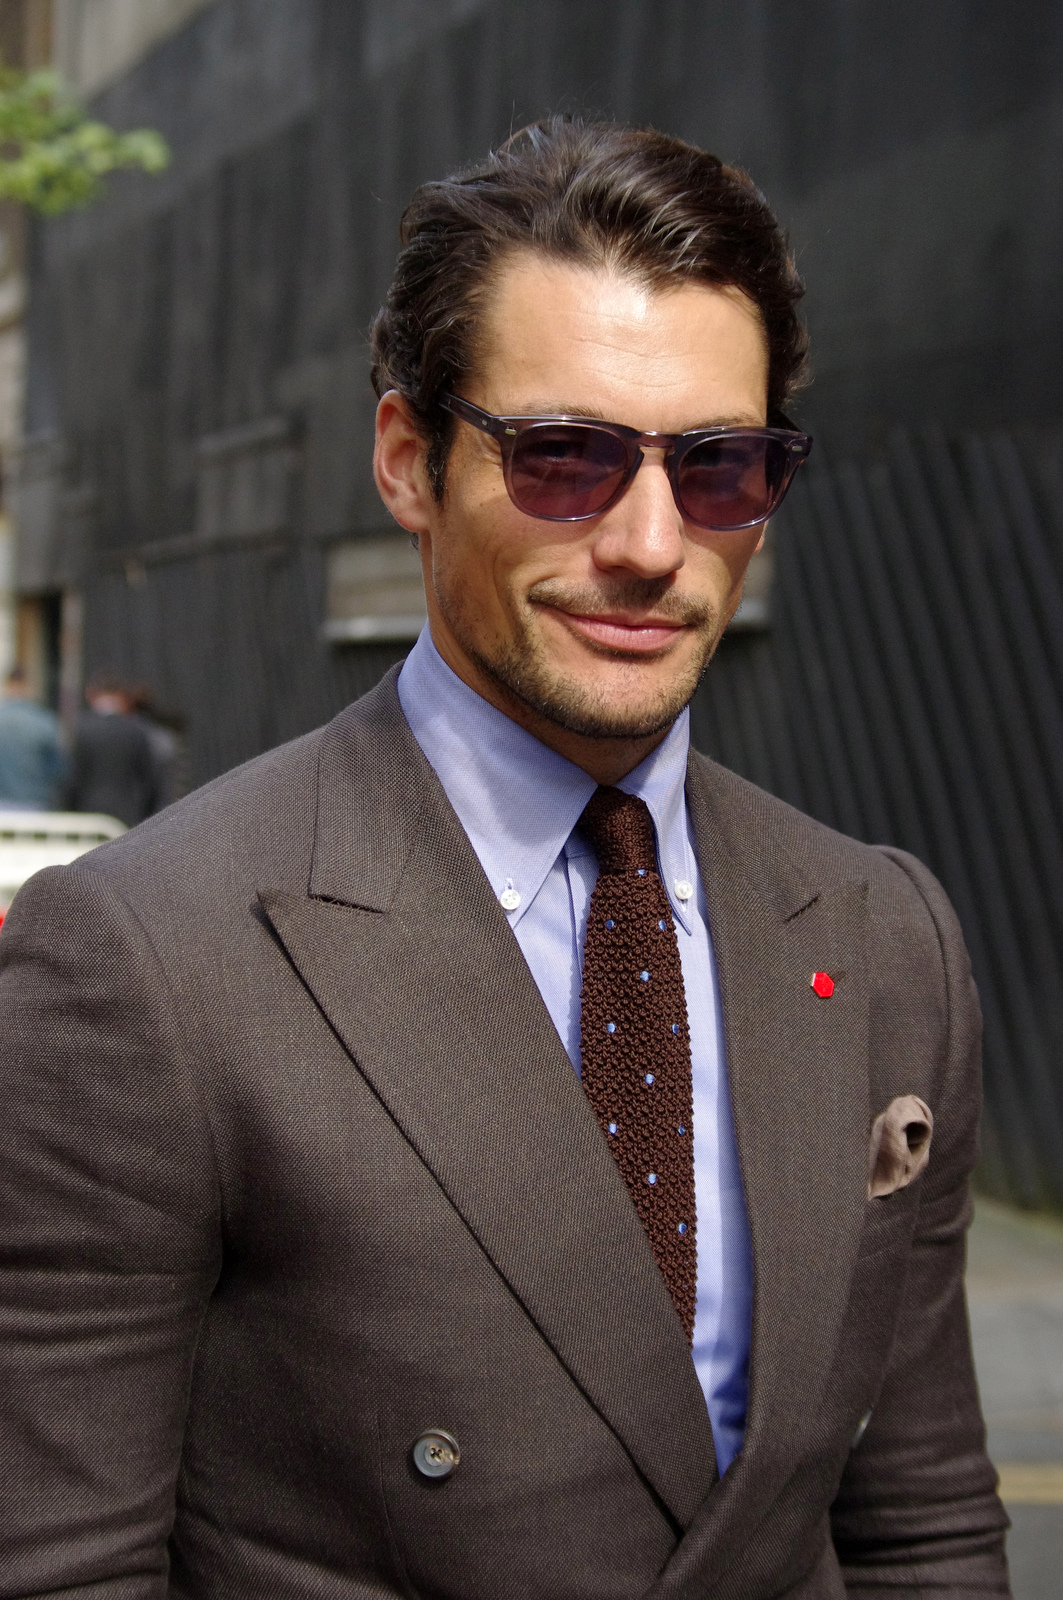 Well-dressed in Suit dark hair man | My Soul Insurance  -  Foter  -  CC BY-SA